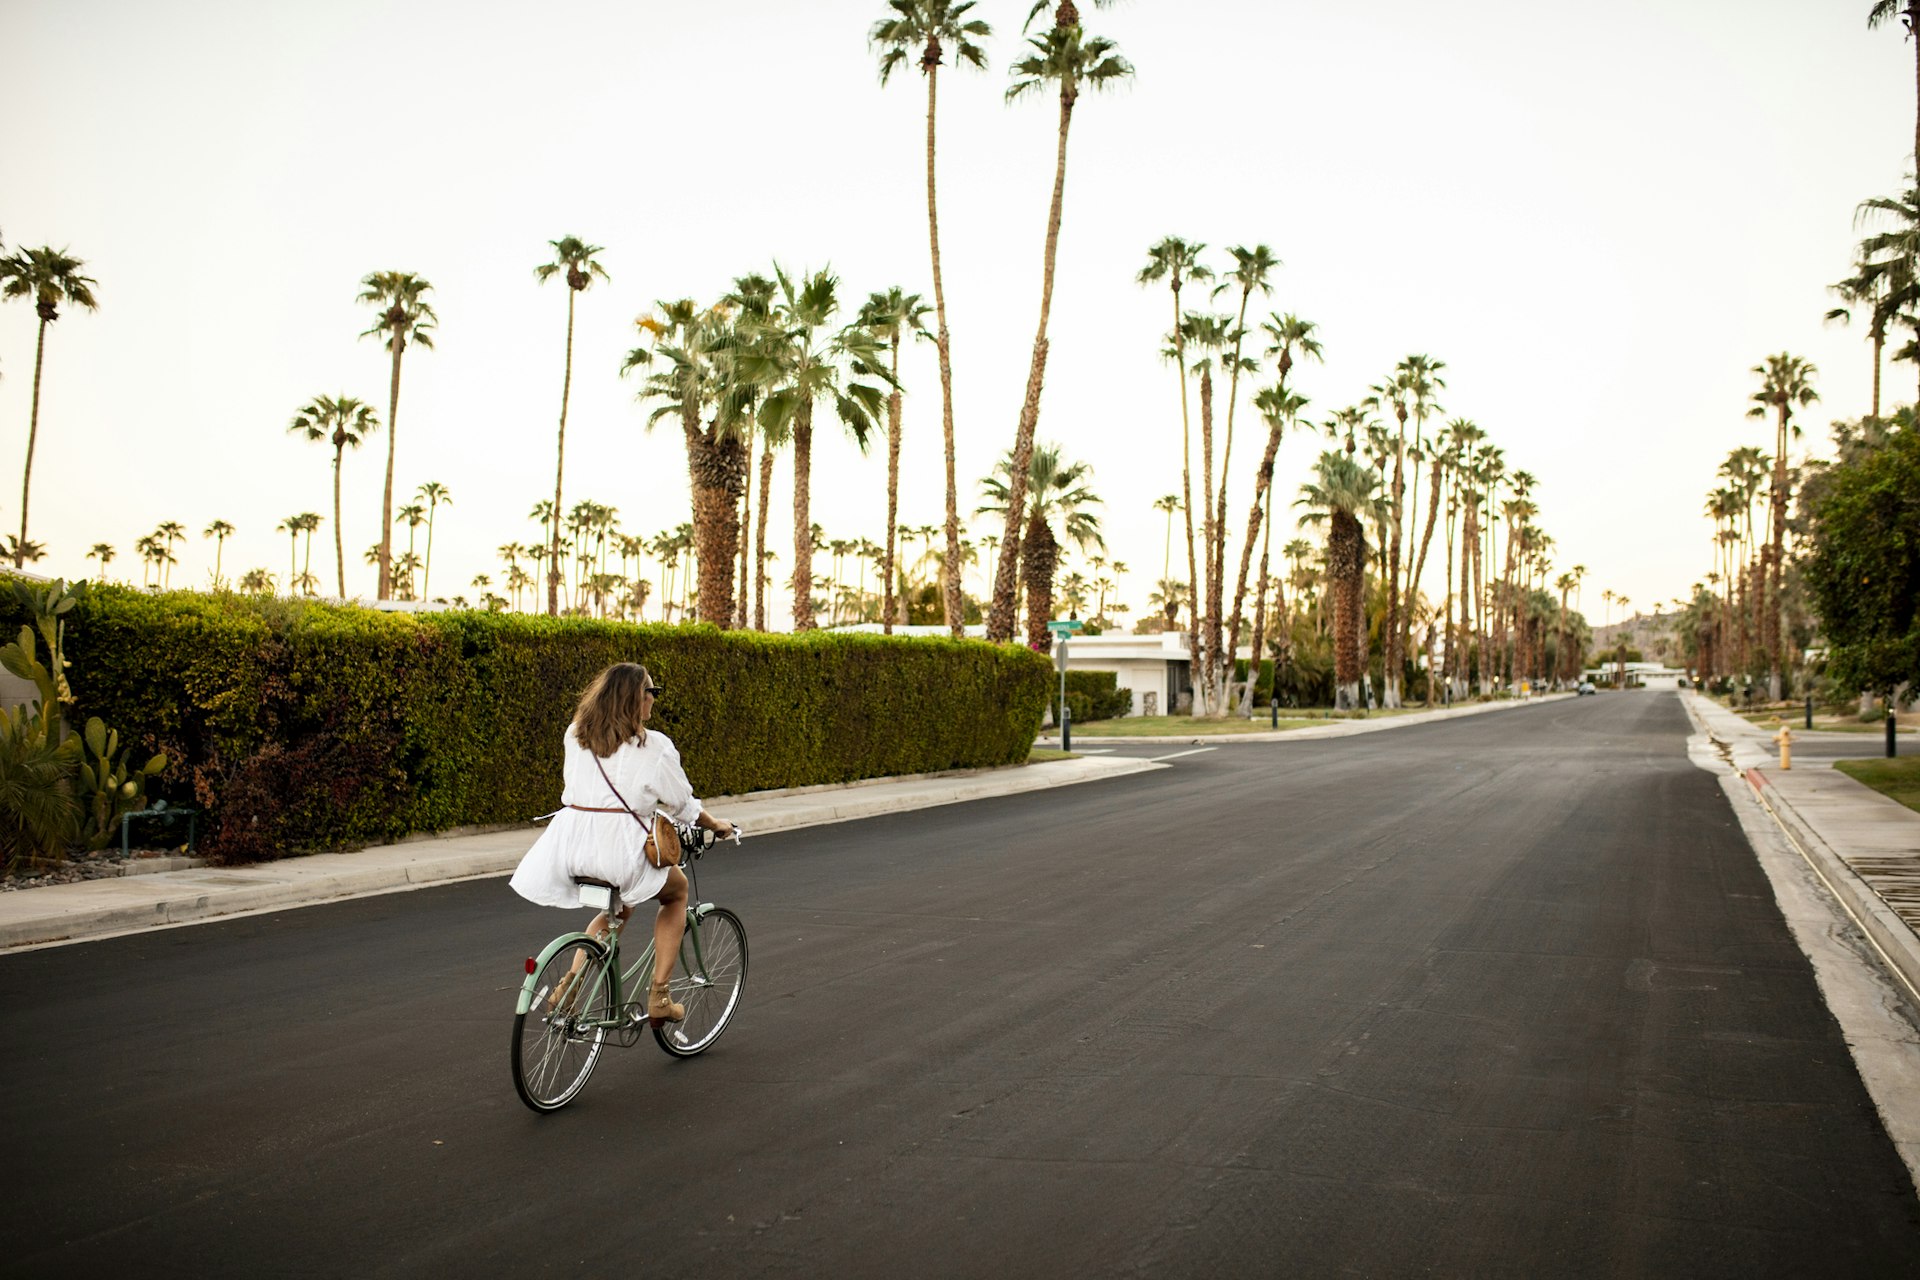 A woman rides a bicycle down a palm-lined street in Palm Springs, California, USA